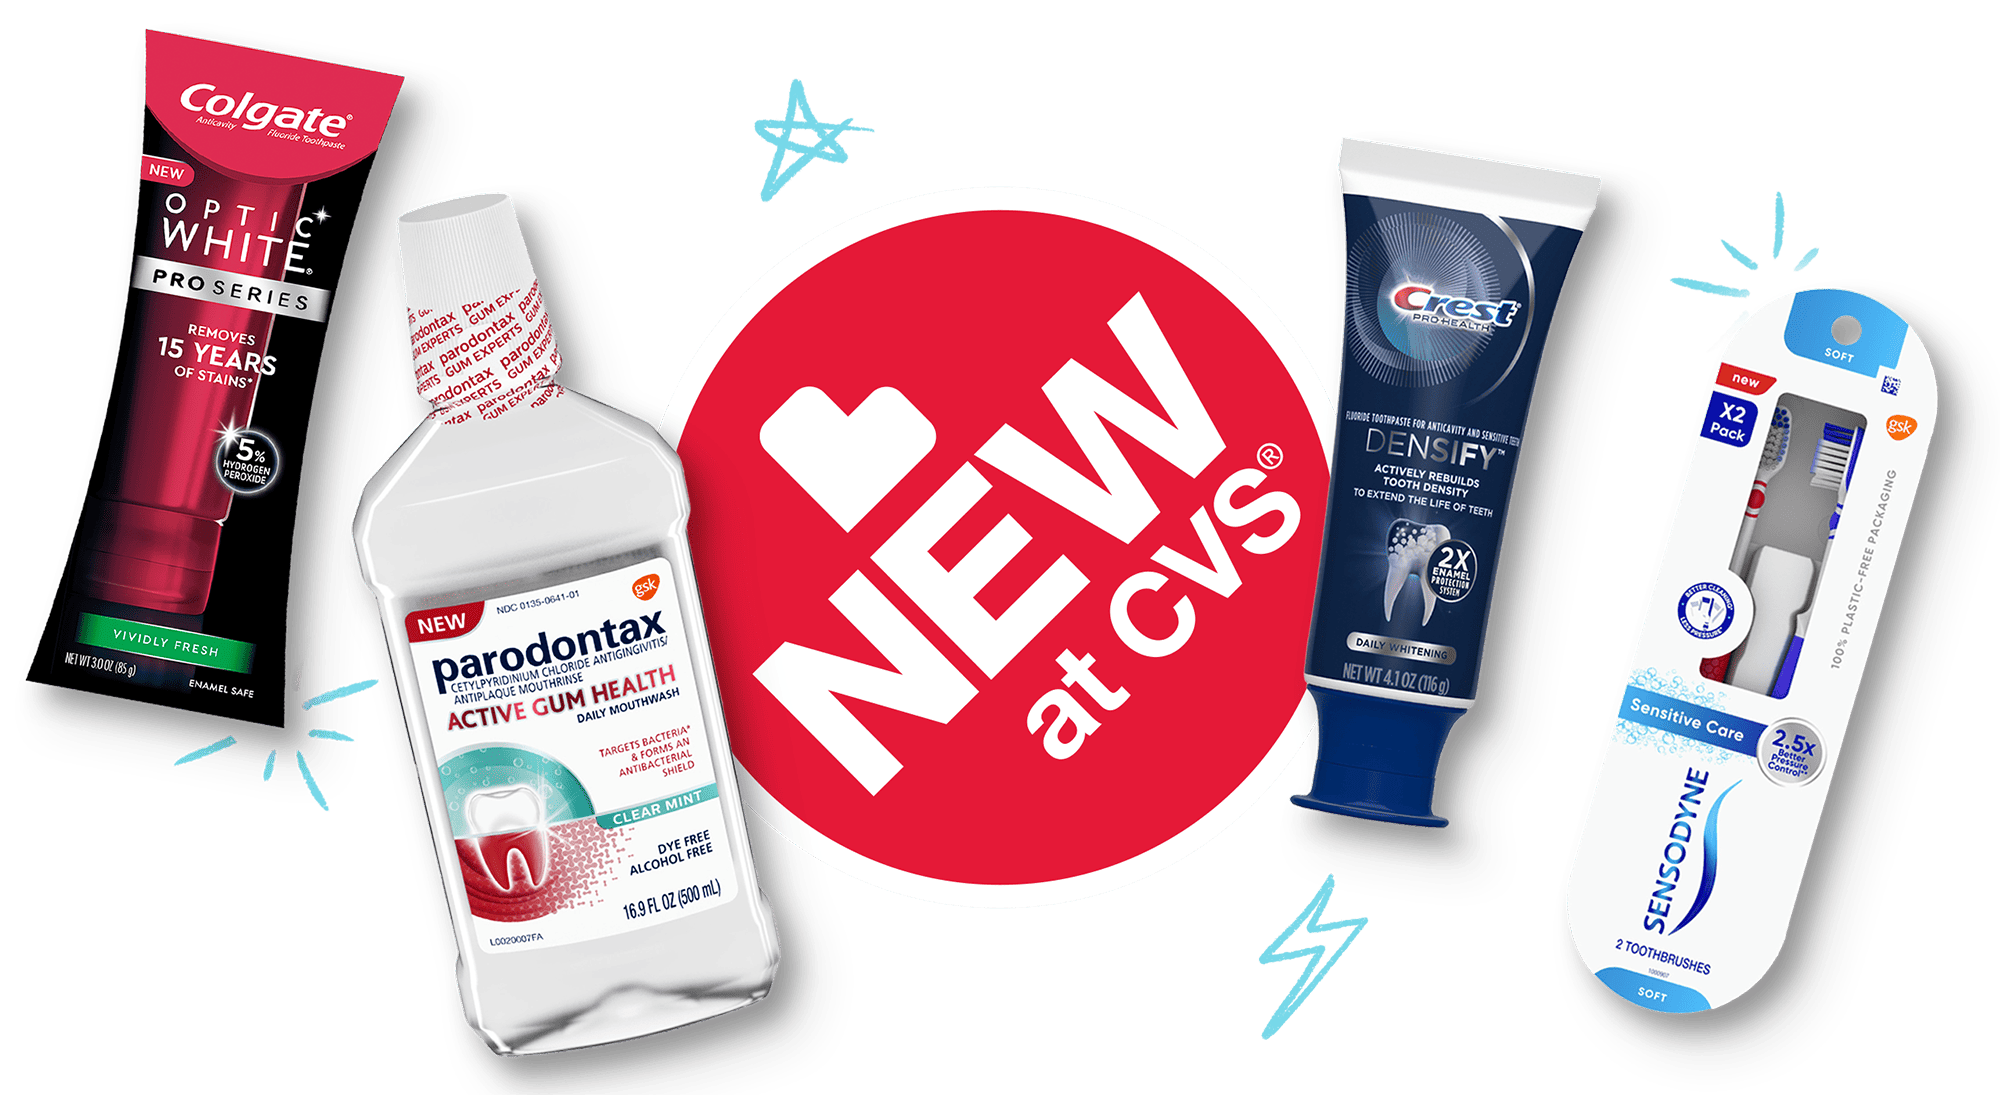 New at CVS® oral care products